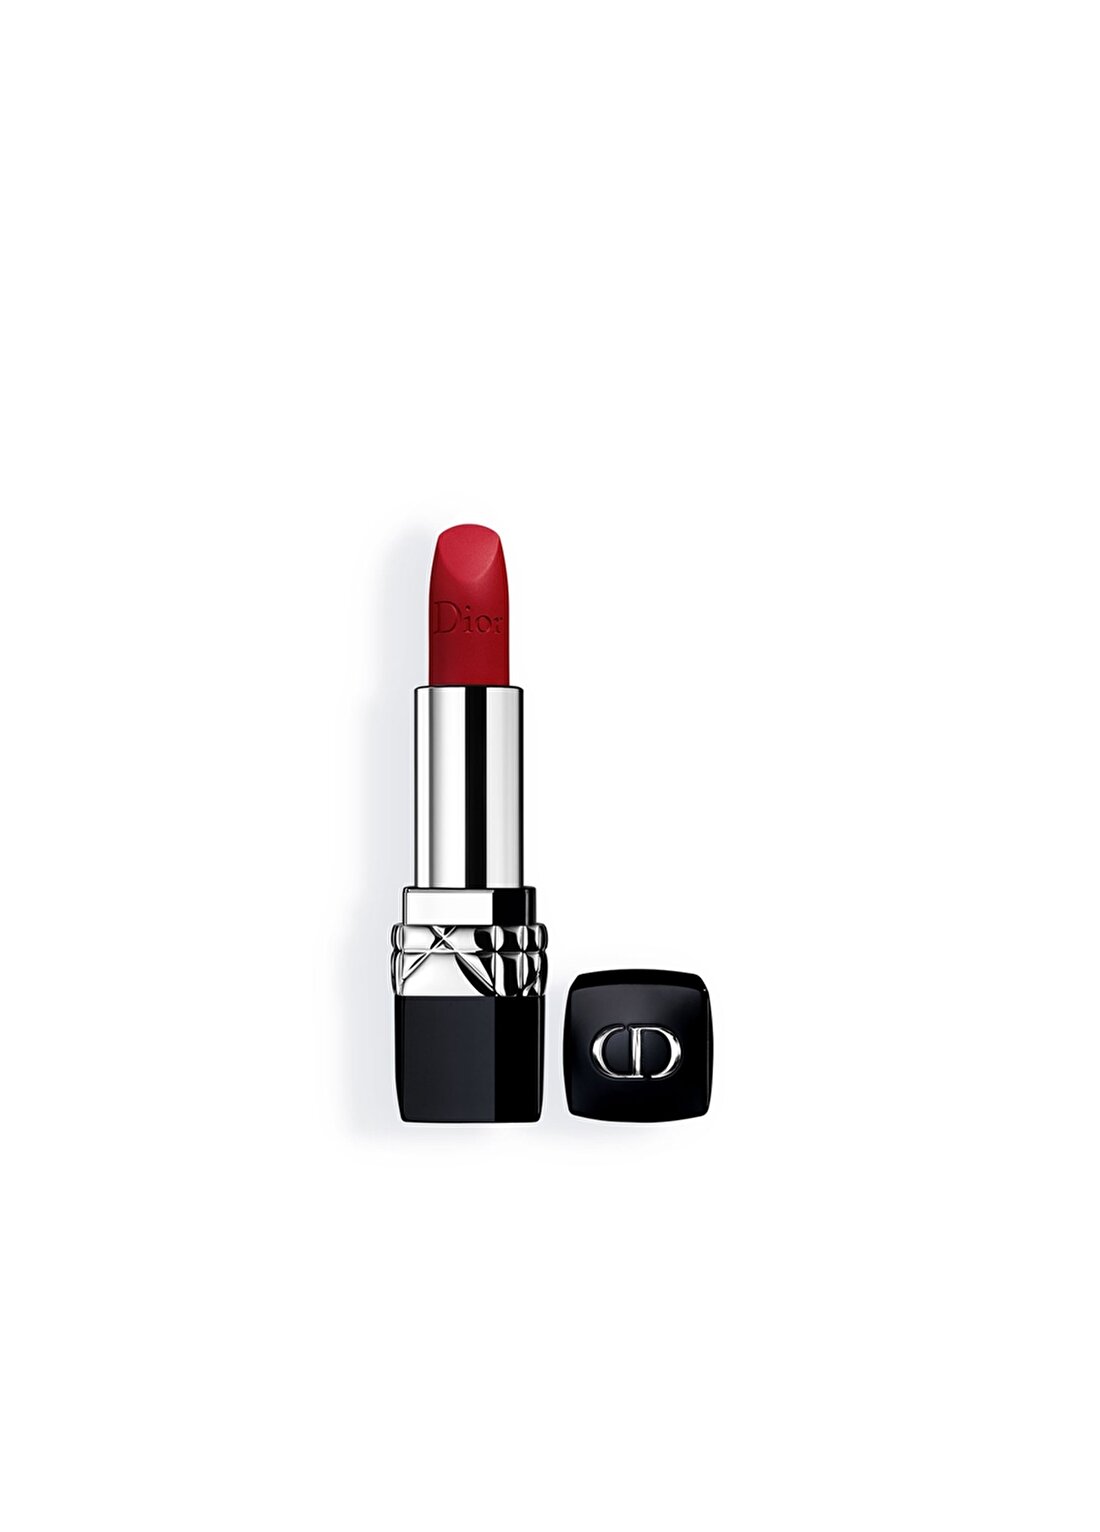 Dior Rouge Dior Limited Edition 666 Ruj